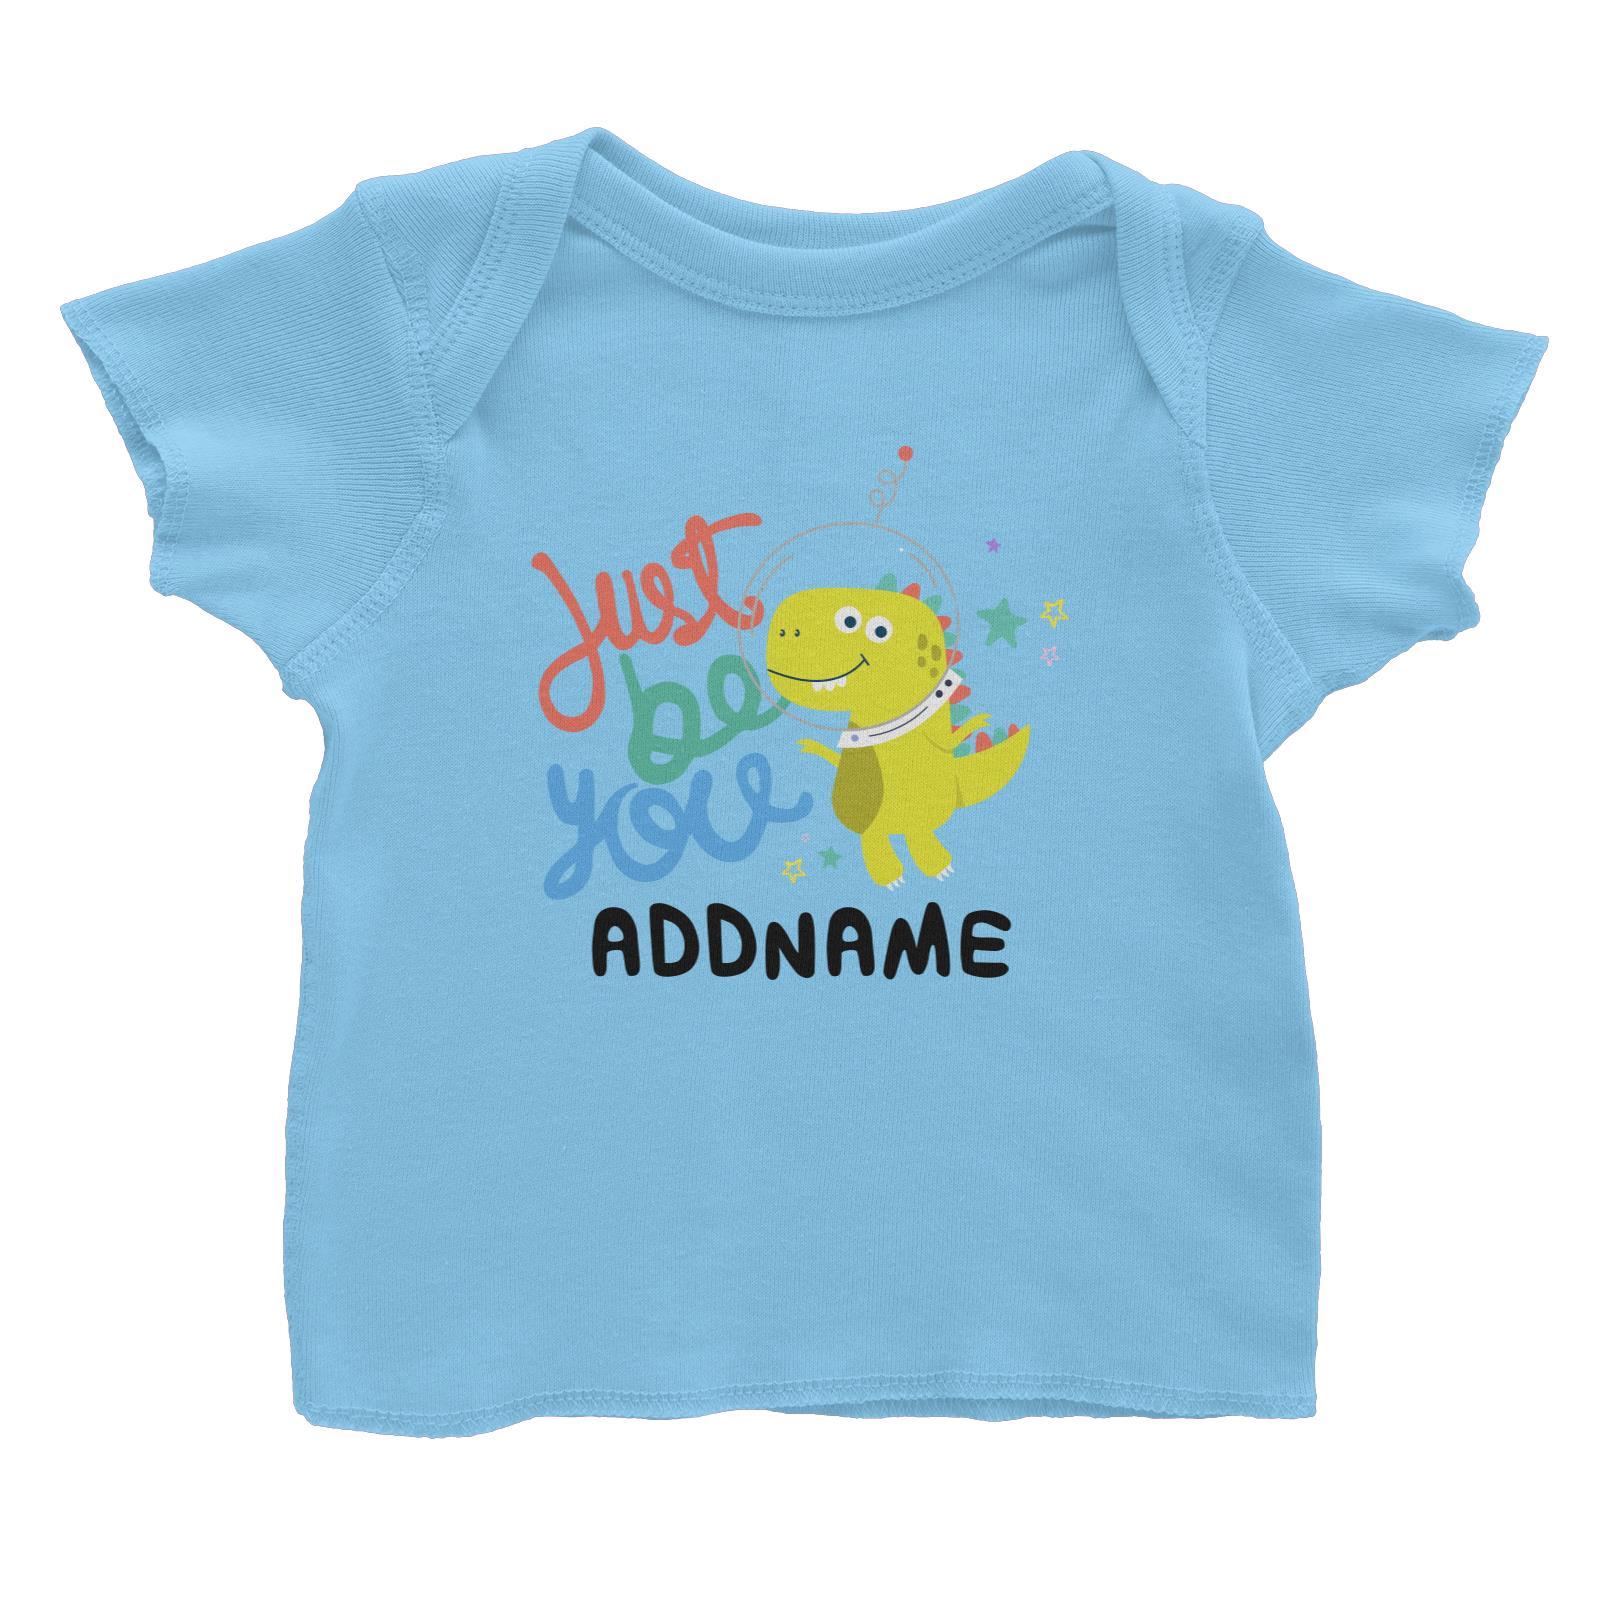 Children's Day Gift Series Just Be You Space Dinosaur Addname Baby T-Shirt